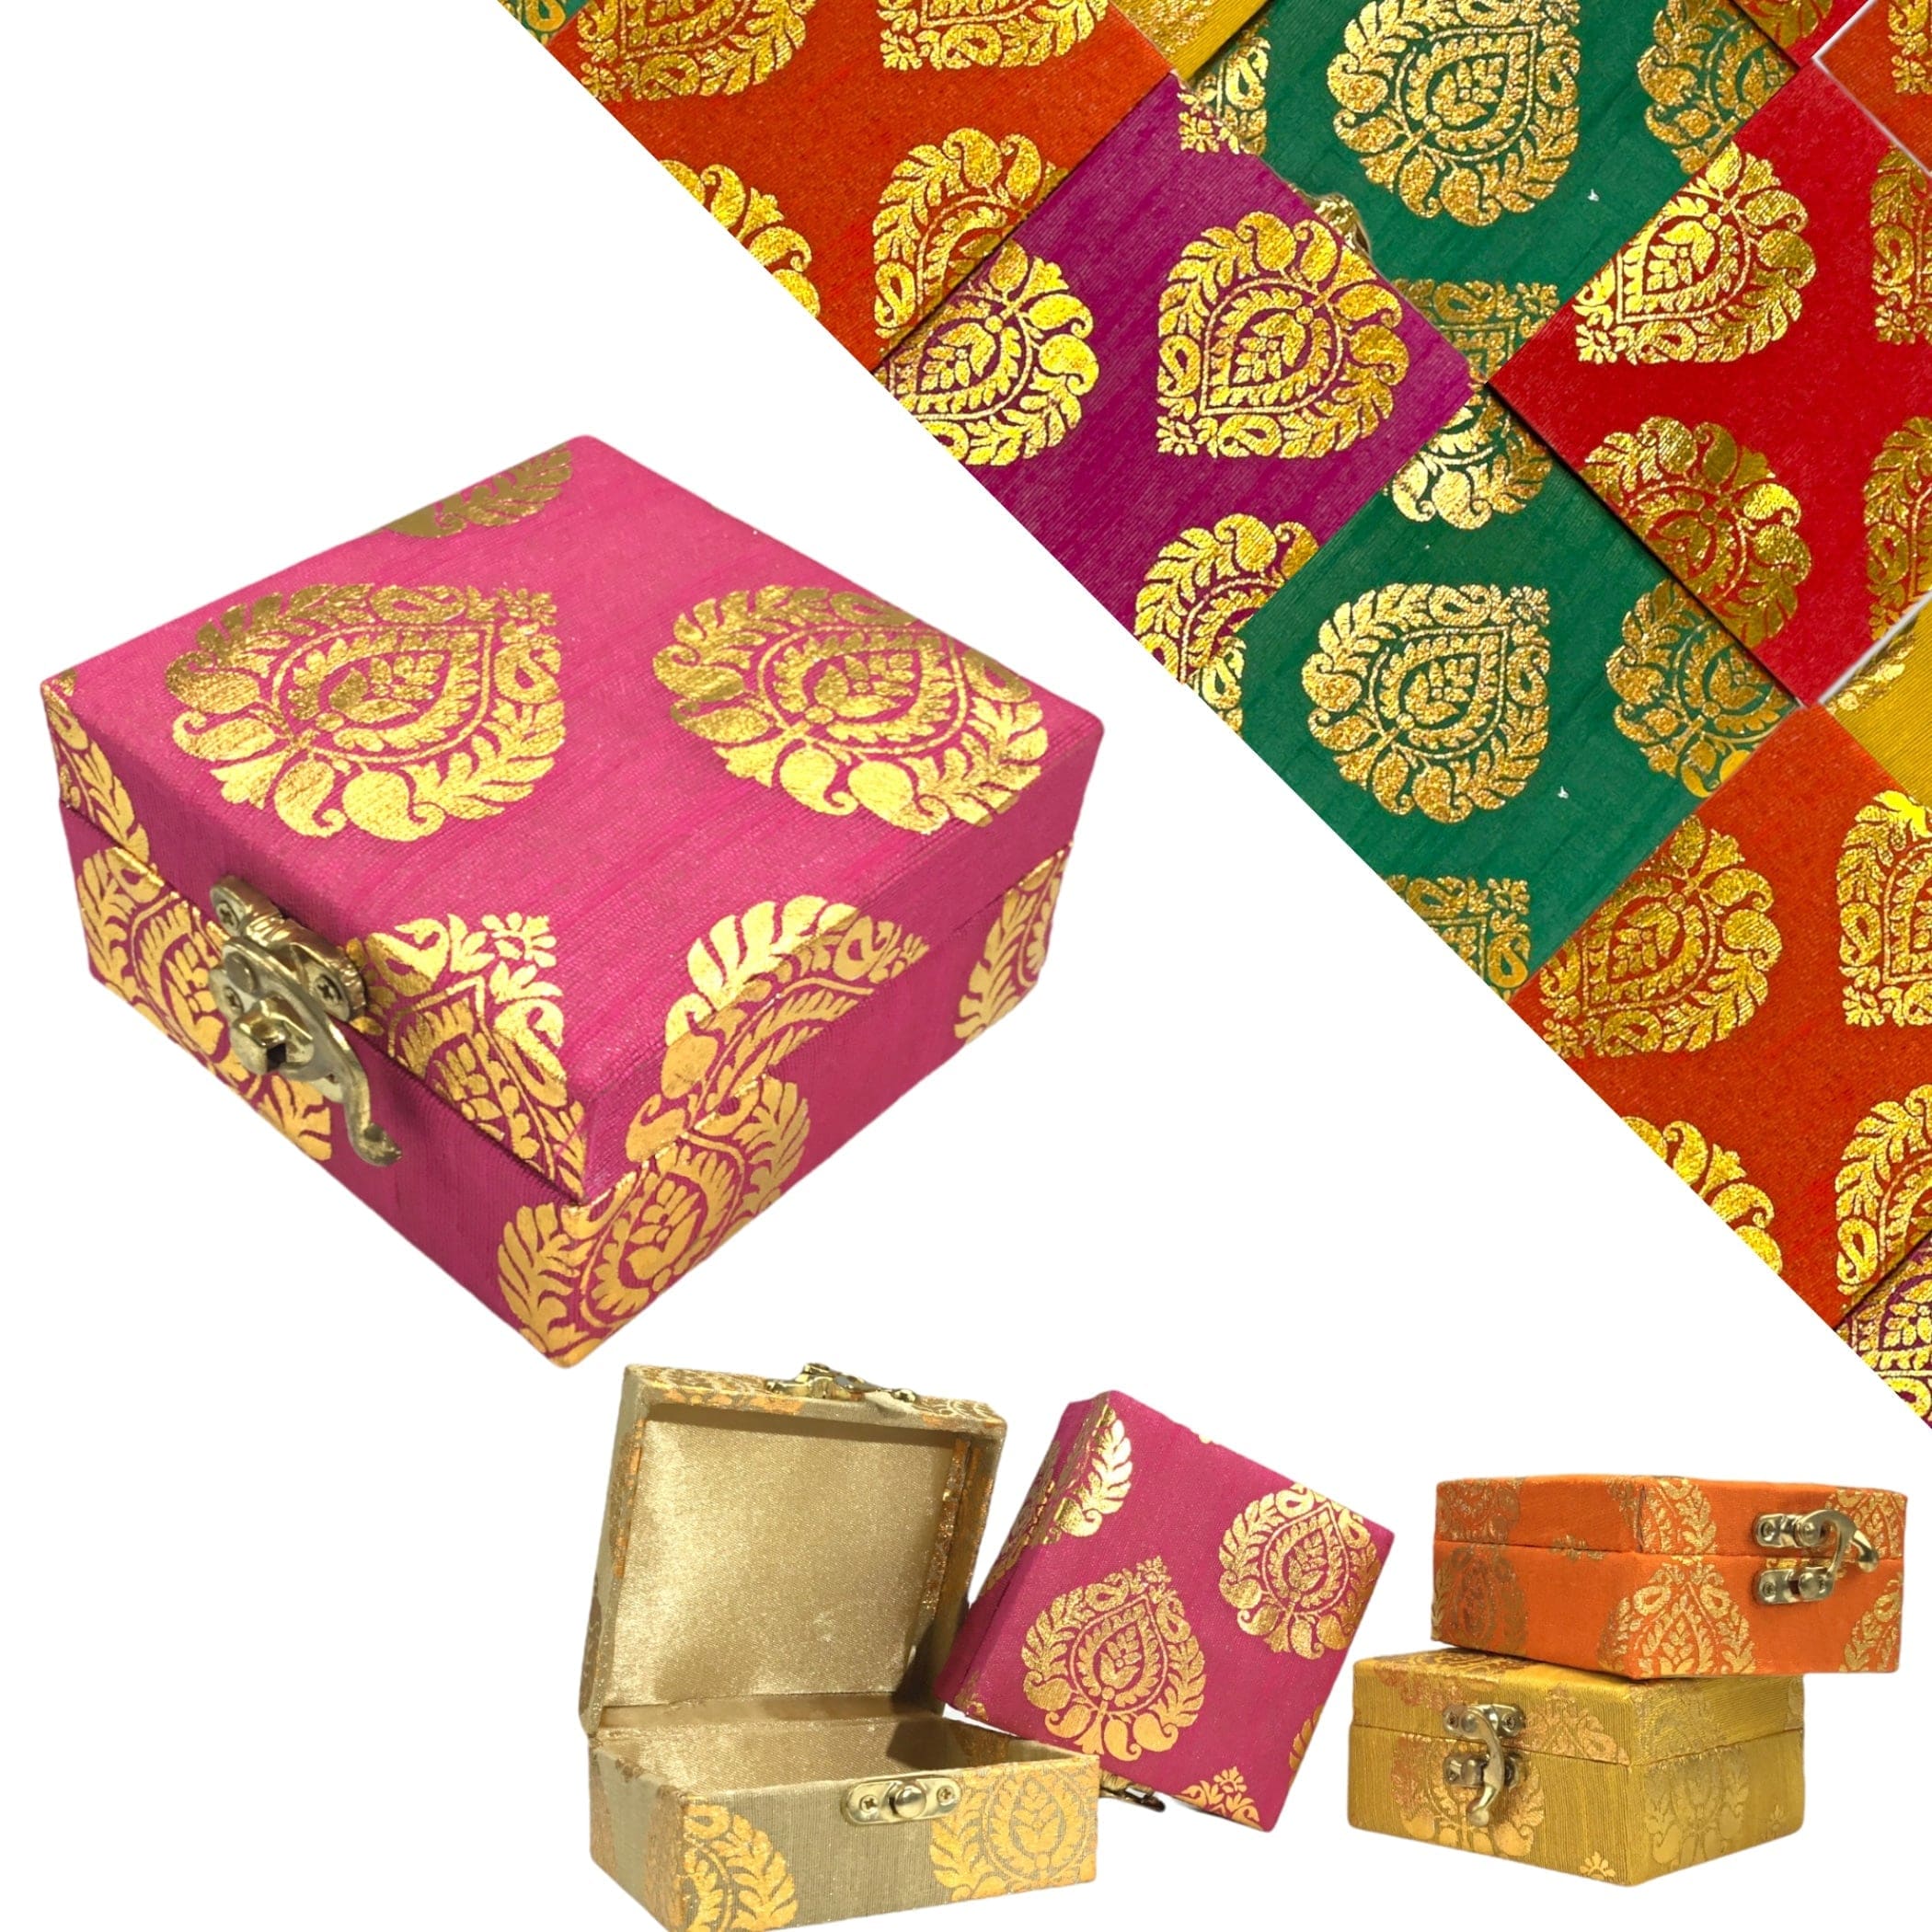 Small handmade jewelry box brocade gift boxes favor for